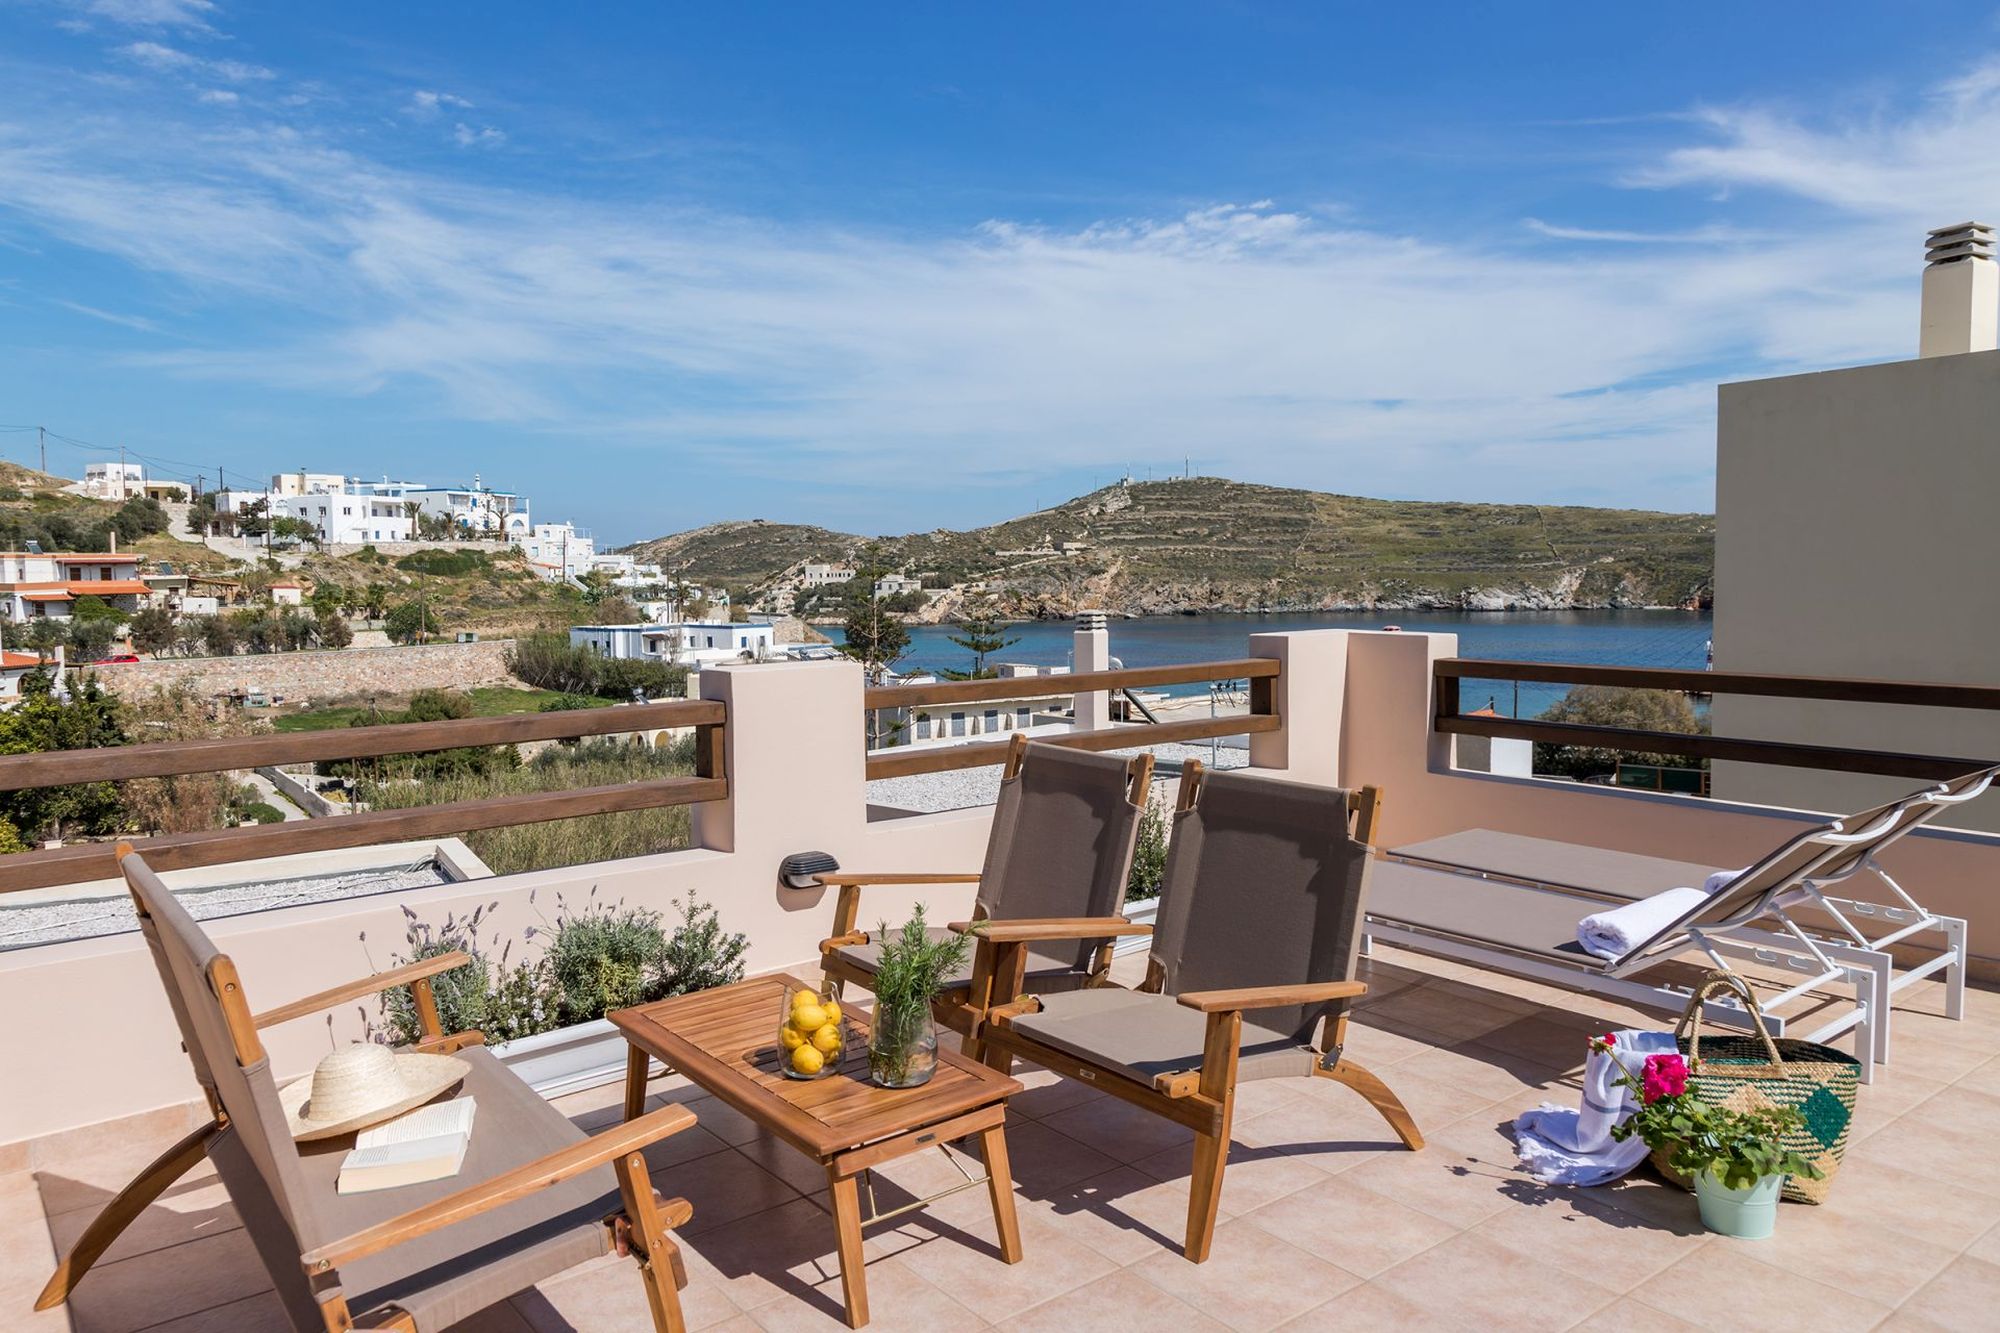 Spacious sea view veranda with lounge, two sunbeds and lovely flowerpots.